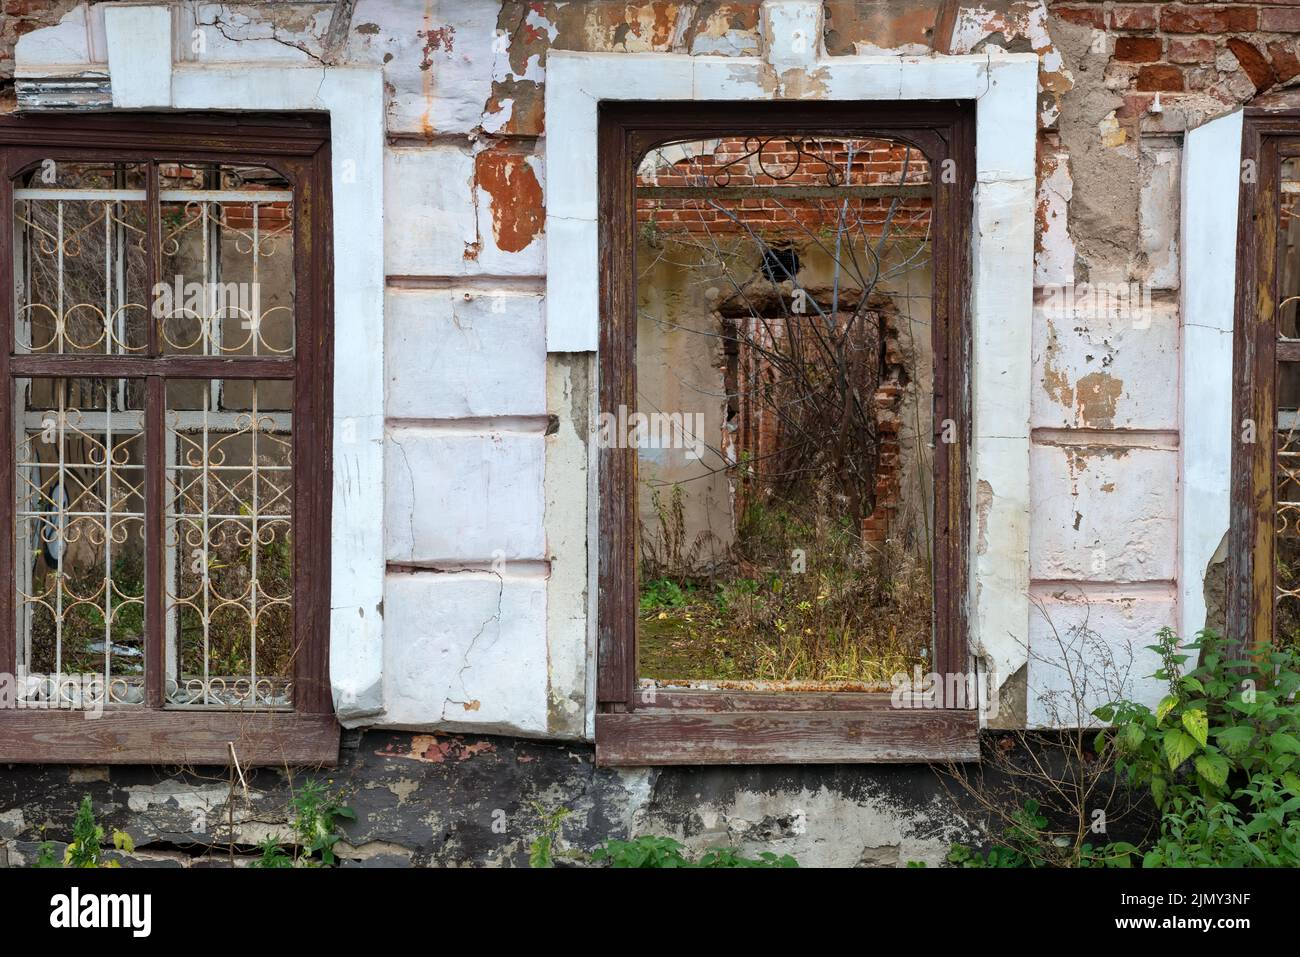 Windows and walls of an old ruined house on an autumn day Stock Photo